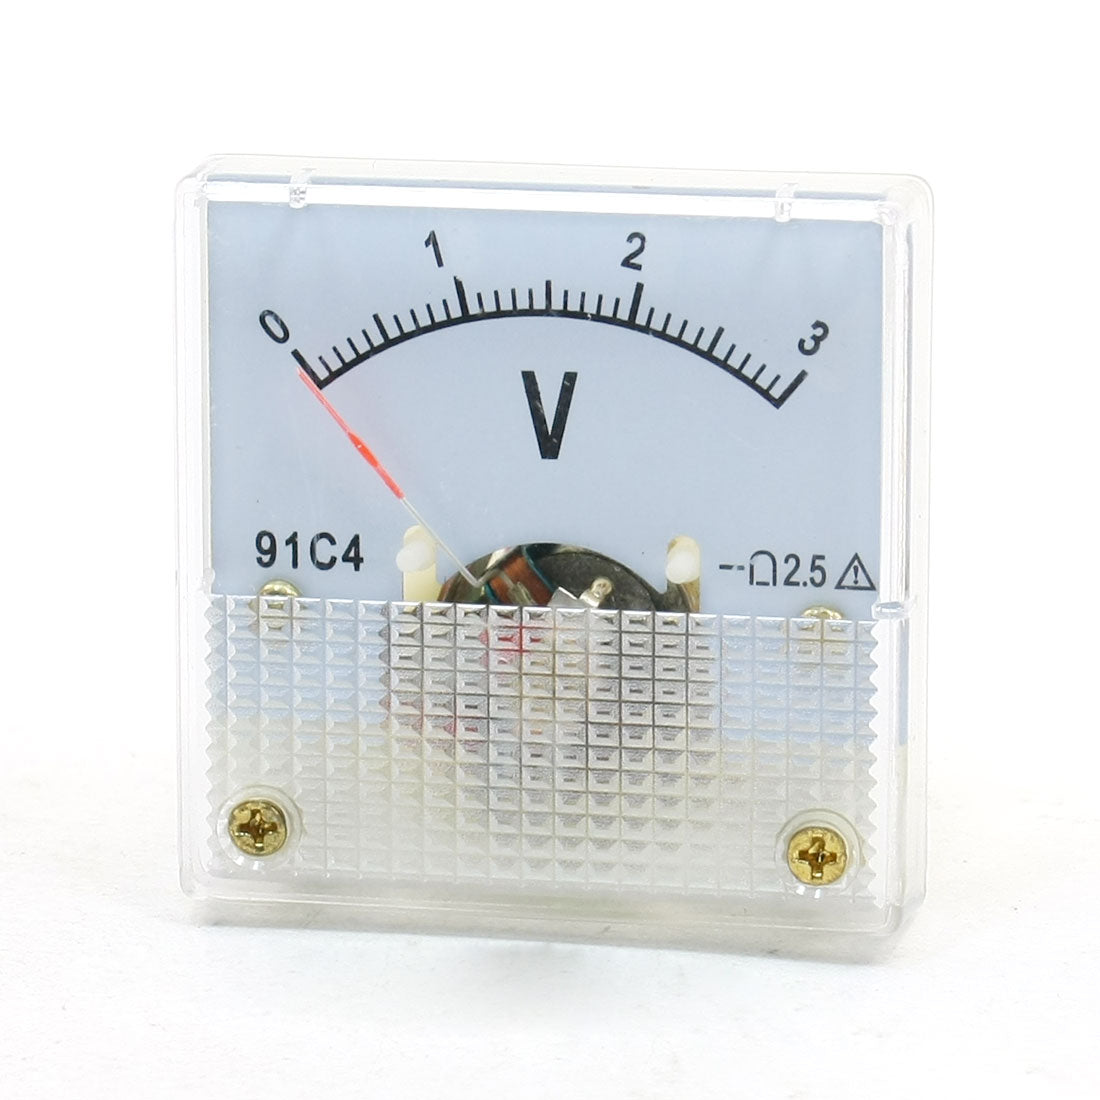 uxcell Uxcell Square Plastic Clear Face DC 0-3V Voltage Panel Meter 91C4